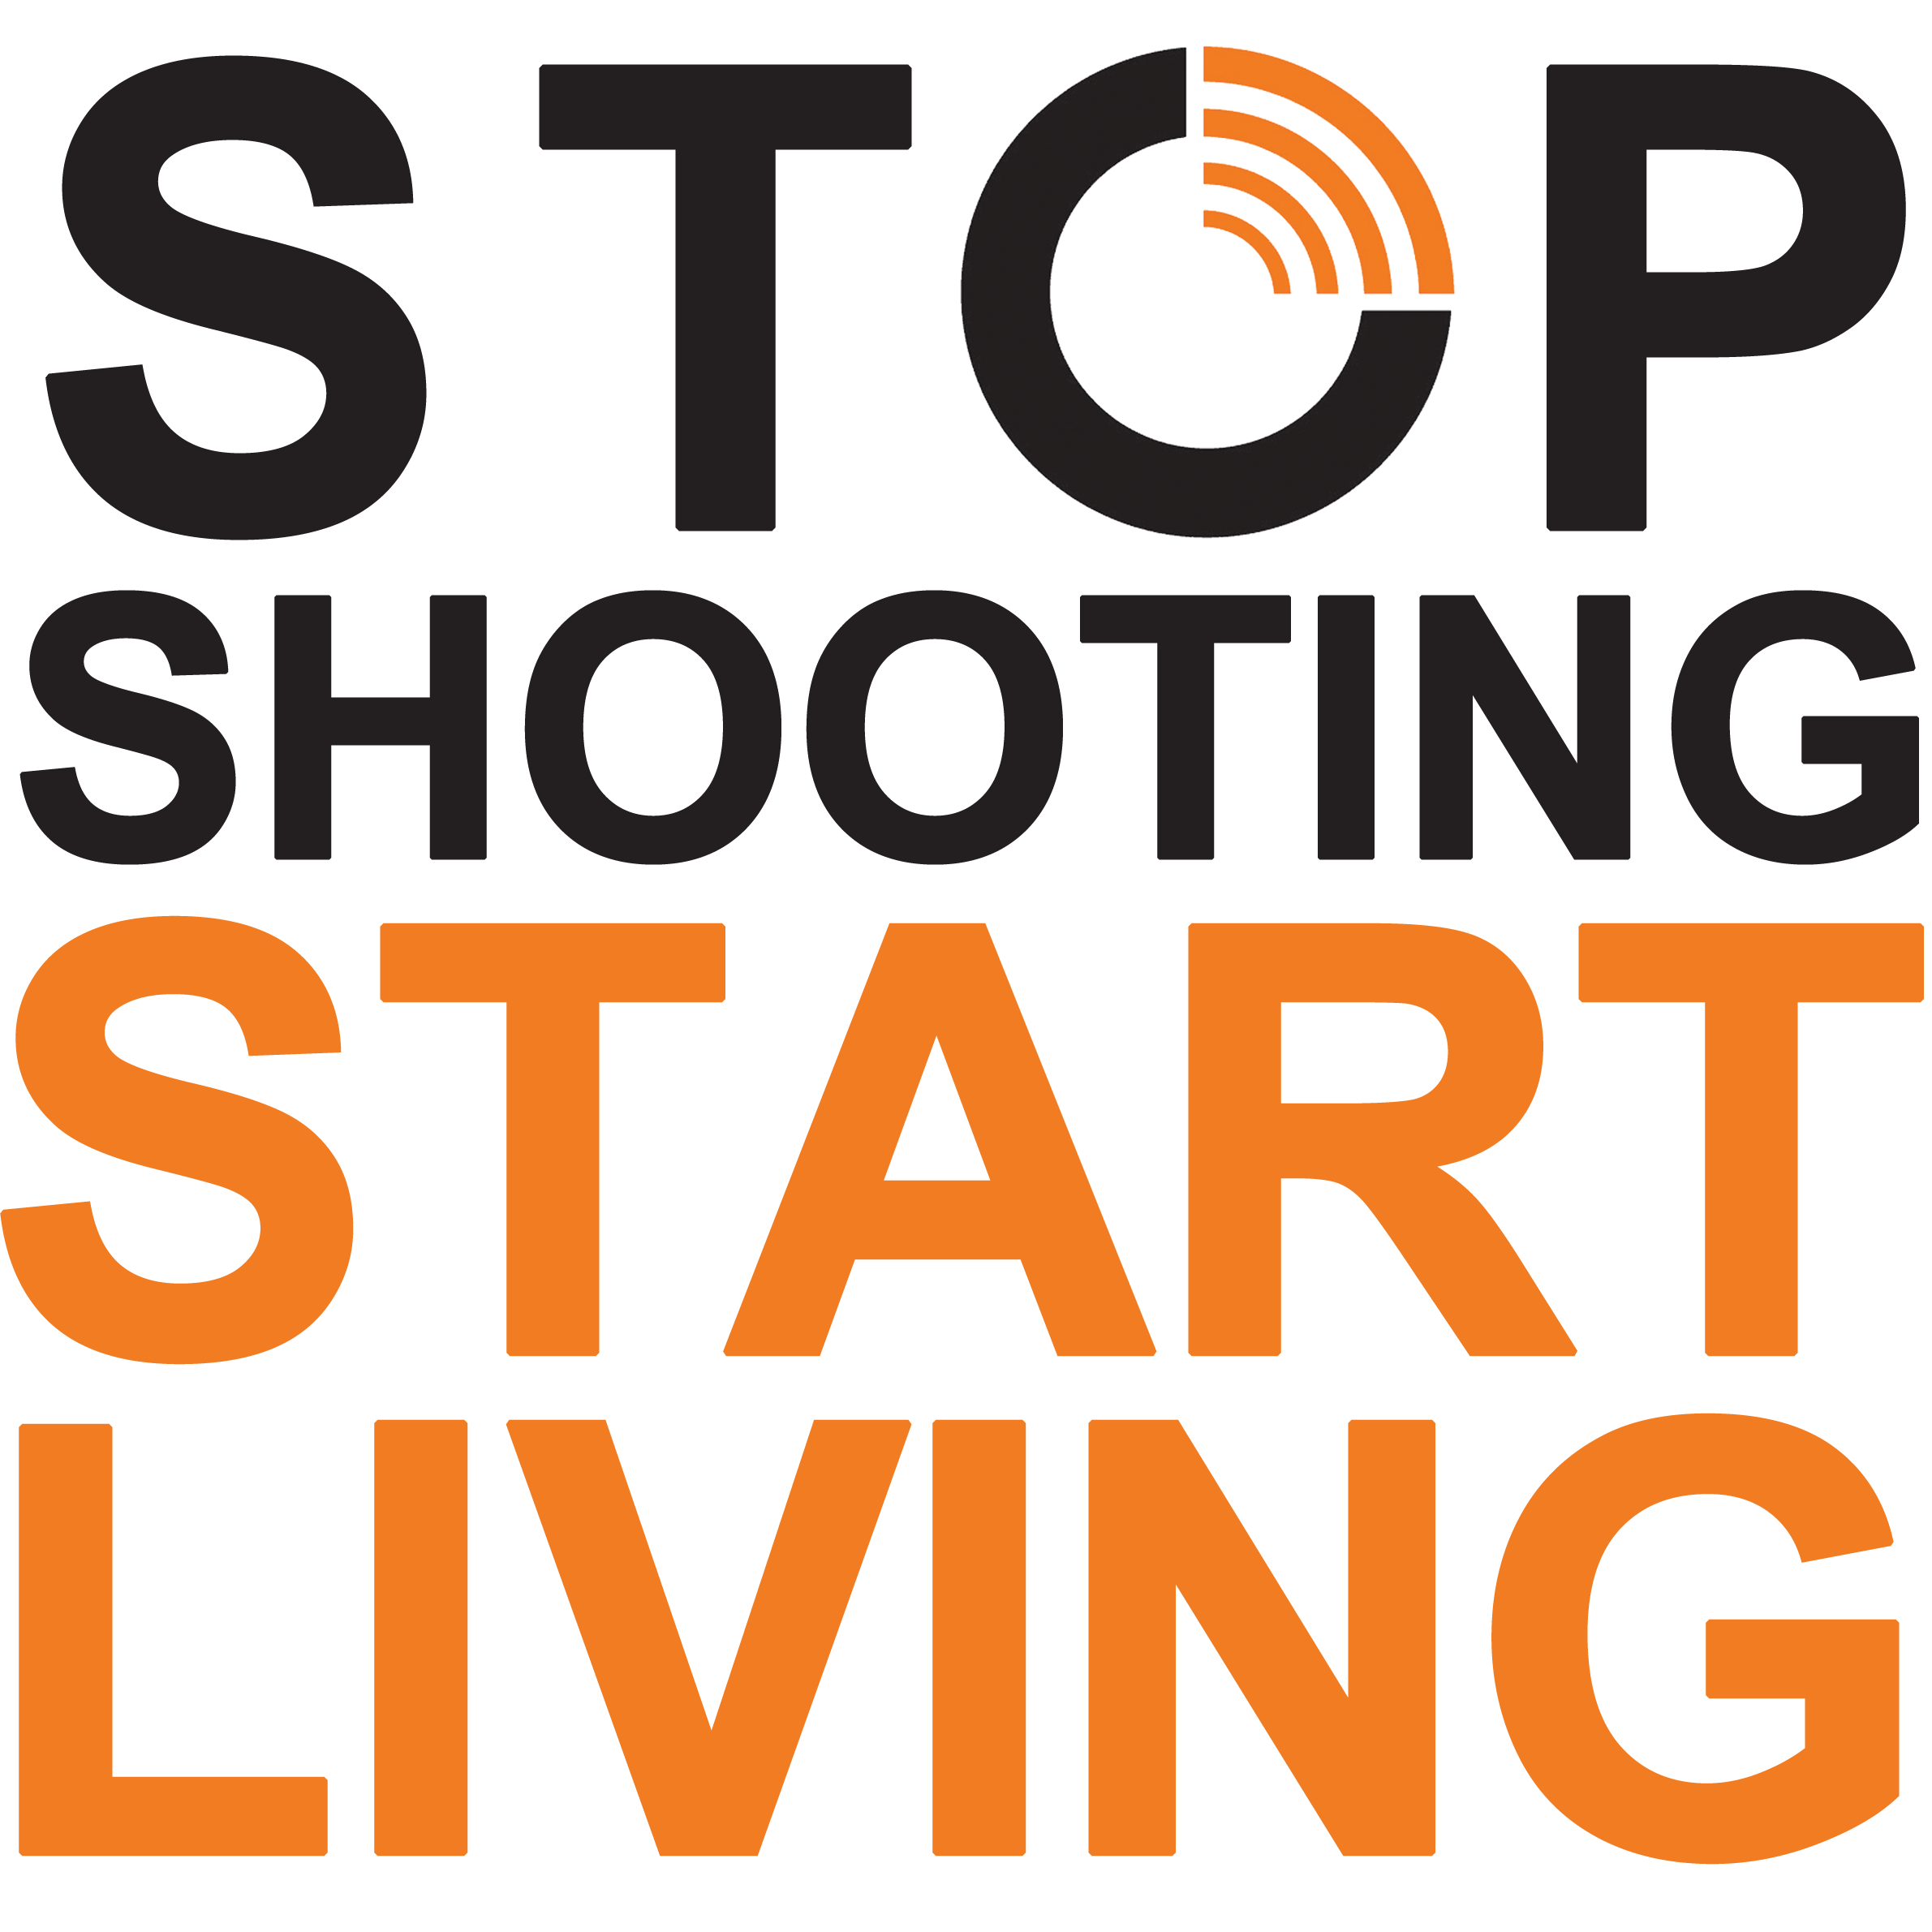 A project of @courtinnovation, Save Our Streets (S.O.S.) is a community-based effort to end gun violence in our neighborhood. STOP SHOOTING, START LIVING!!